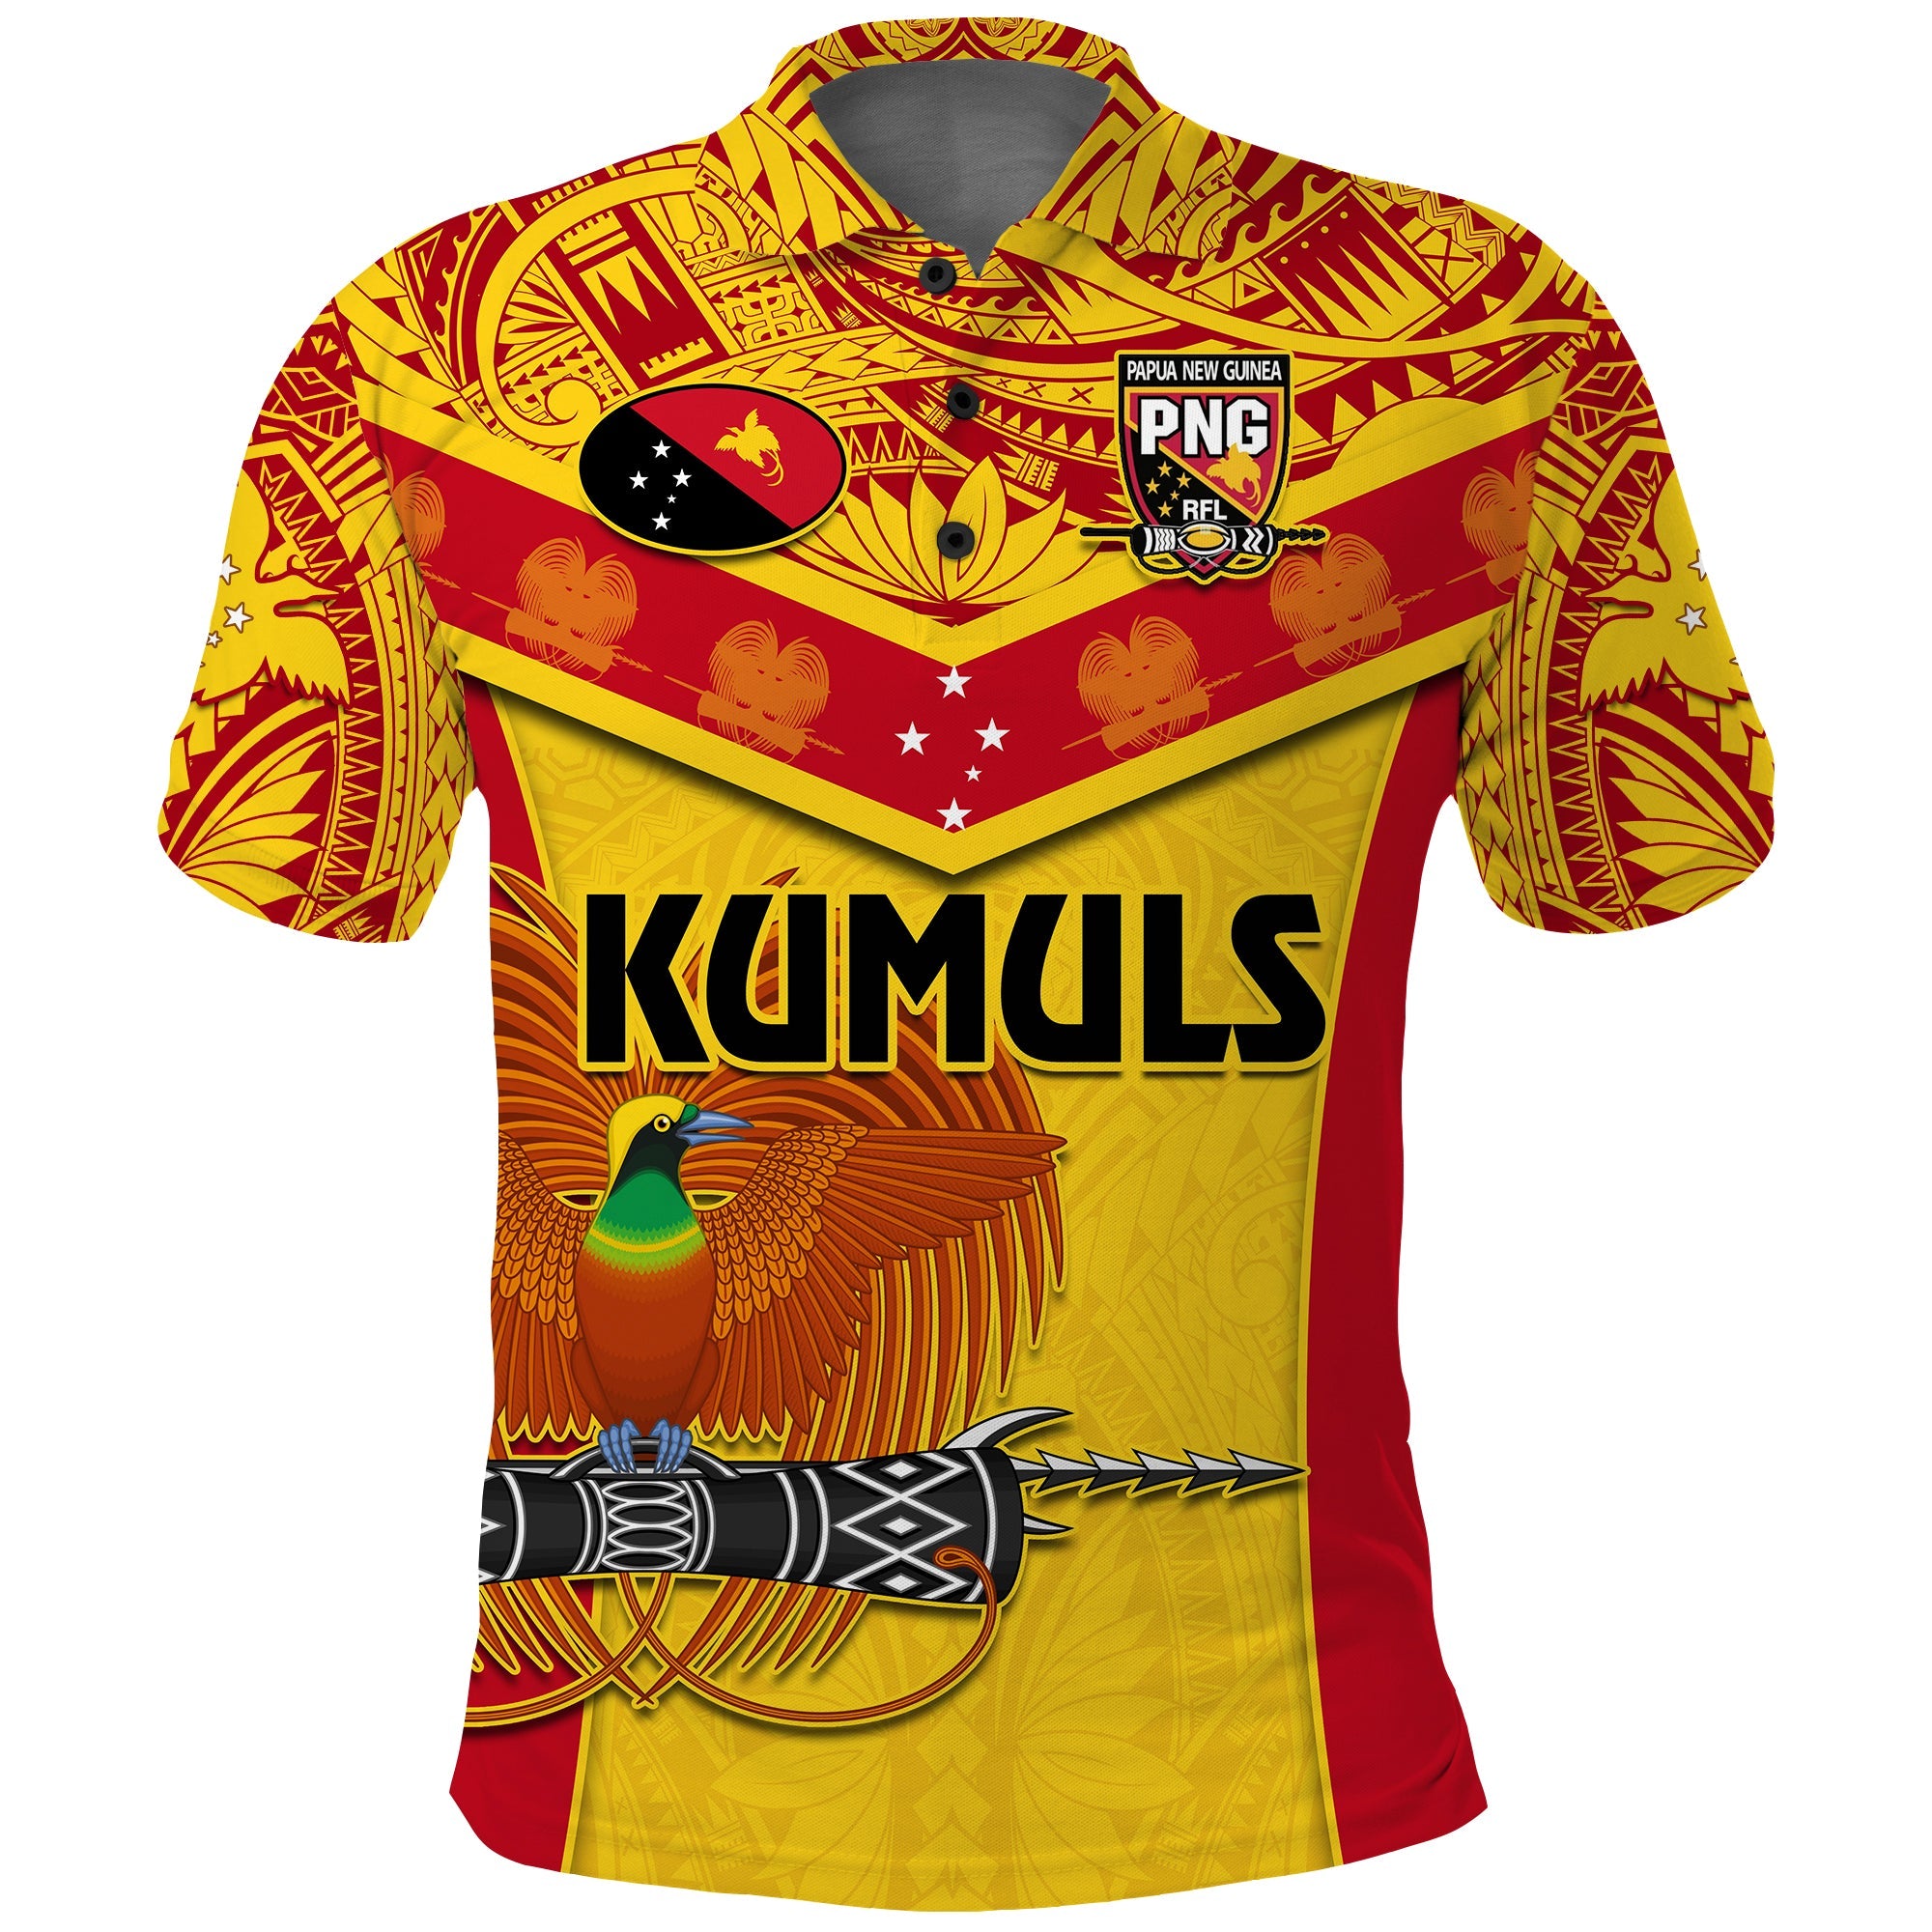 Papua New Guinea Rugby Polo Shirt PNG Kumuls Bird Of Paradise Yellow LT14 Adult Yellow - Polynesian Pride